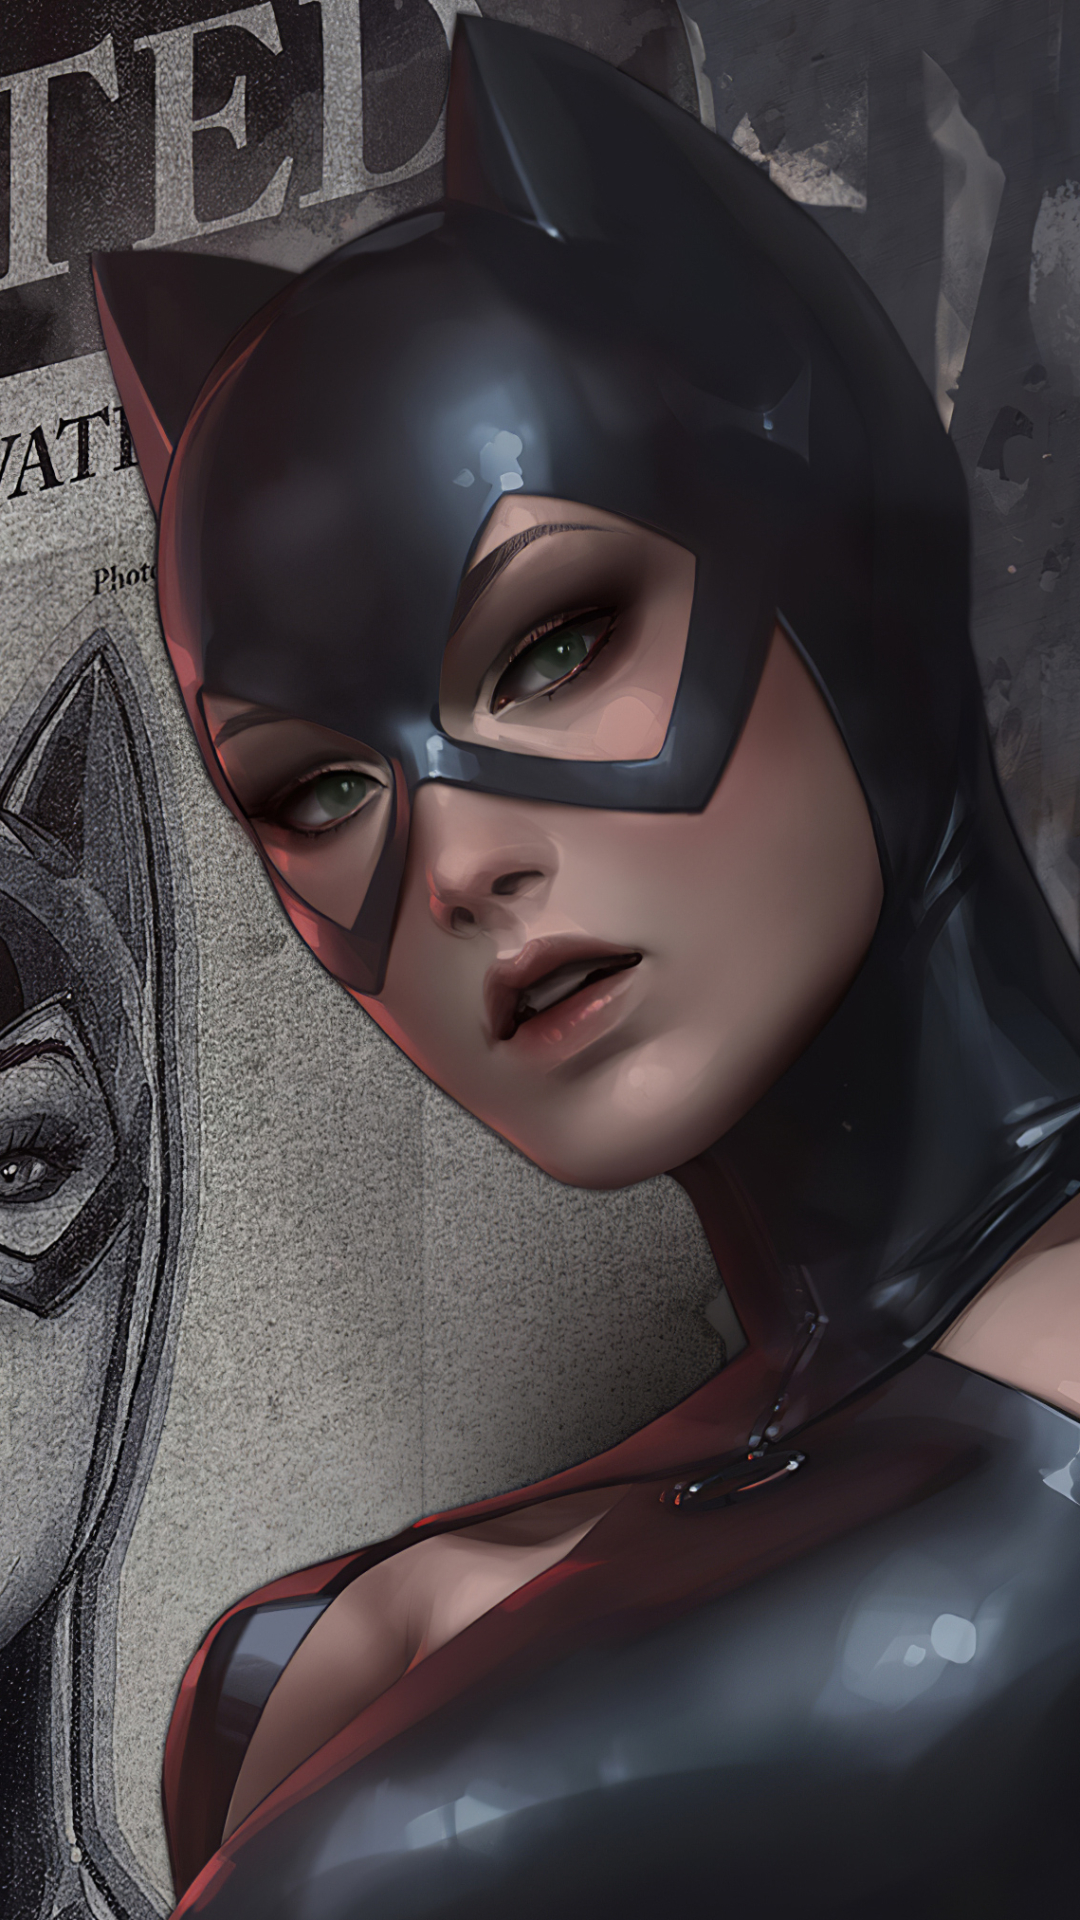 Catwoman Phone Wallpaper by JeeHyung lee